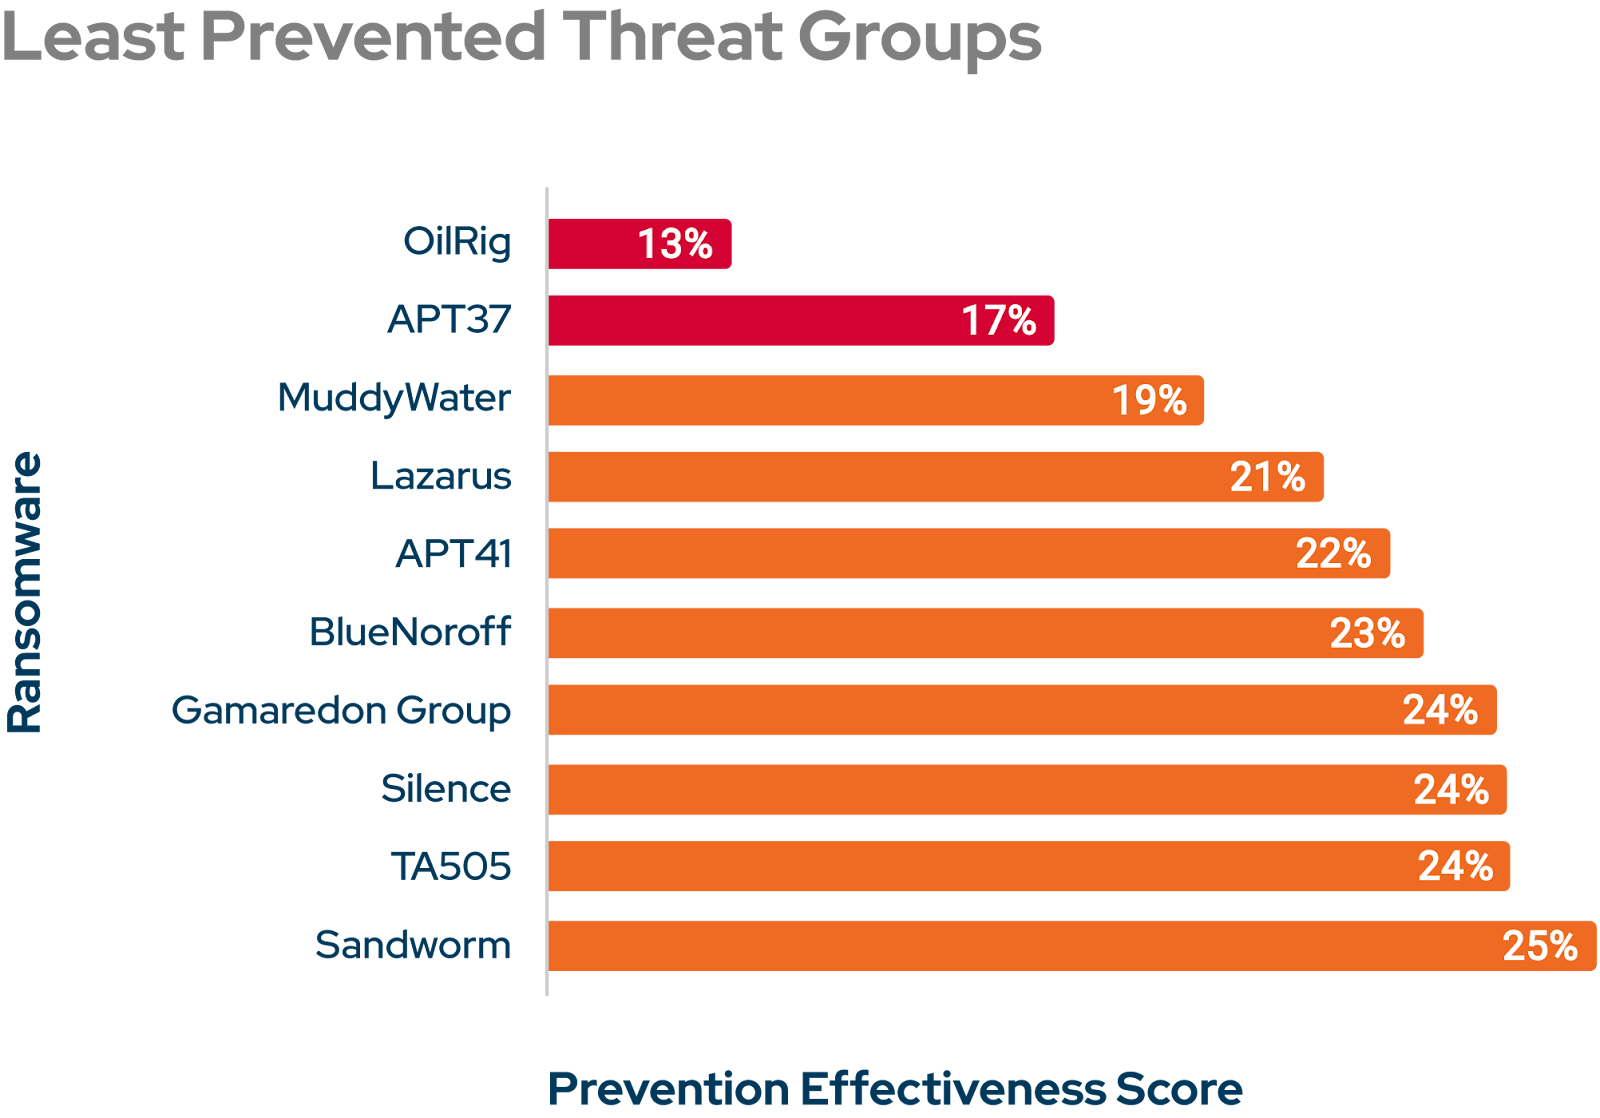 The 10 least prevented ransomware groups